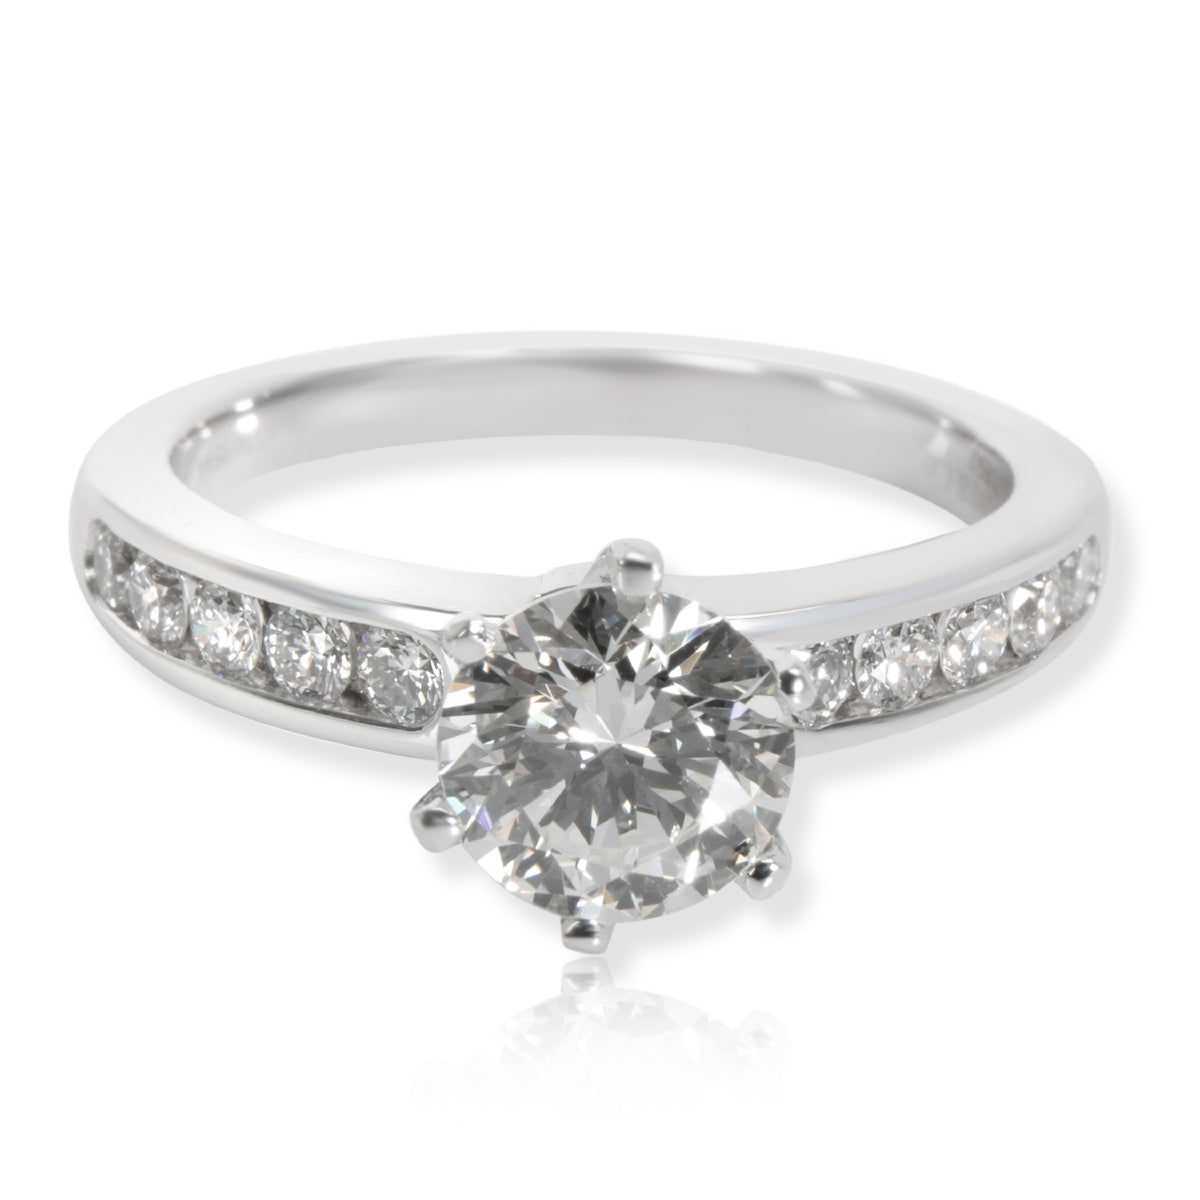 Tiffany & Co. Channel Diamond Engagement Ring in Platinum I VVS1 1.6 CTW